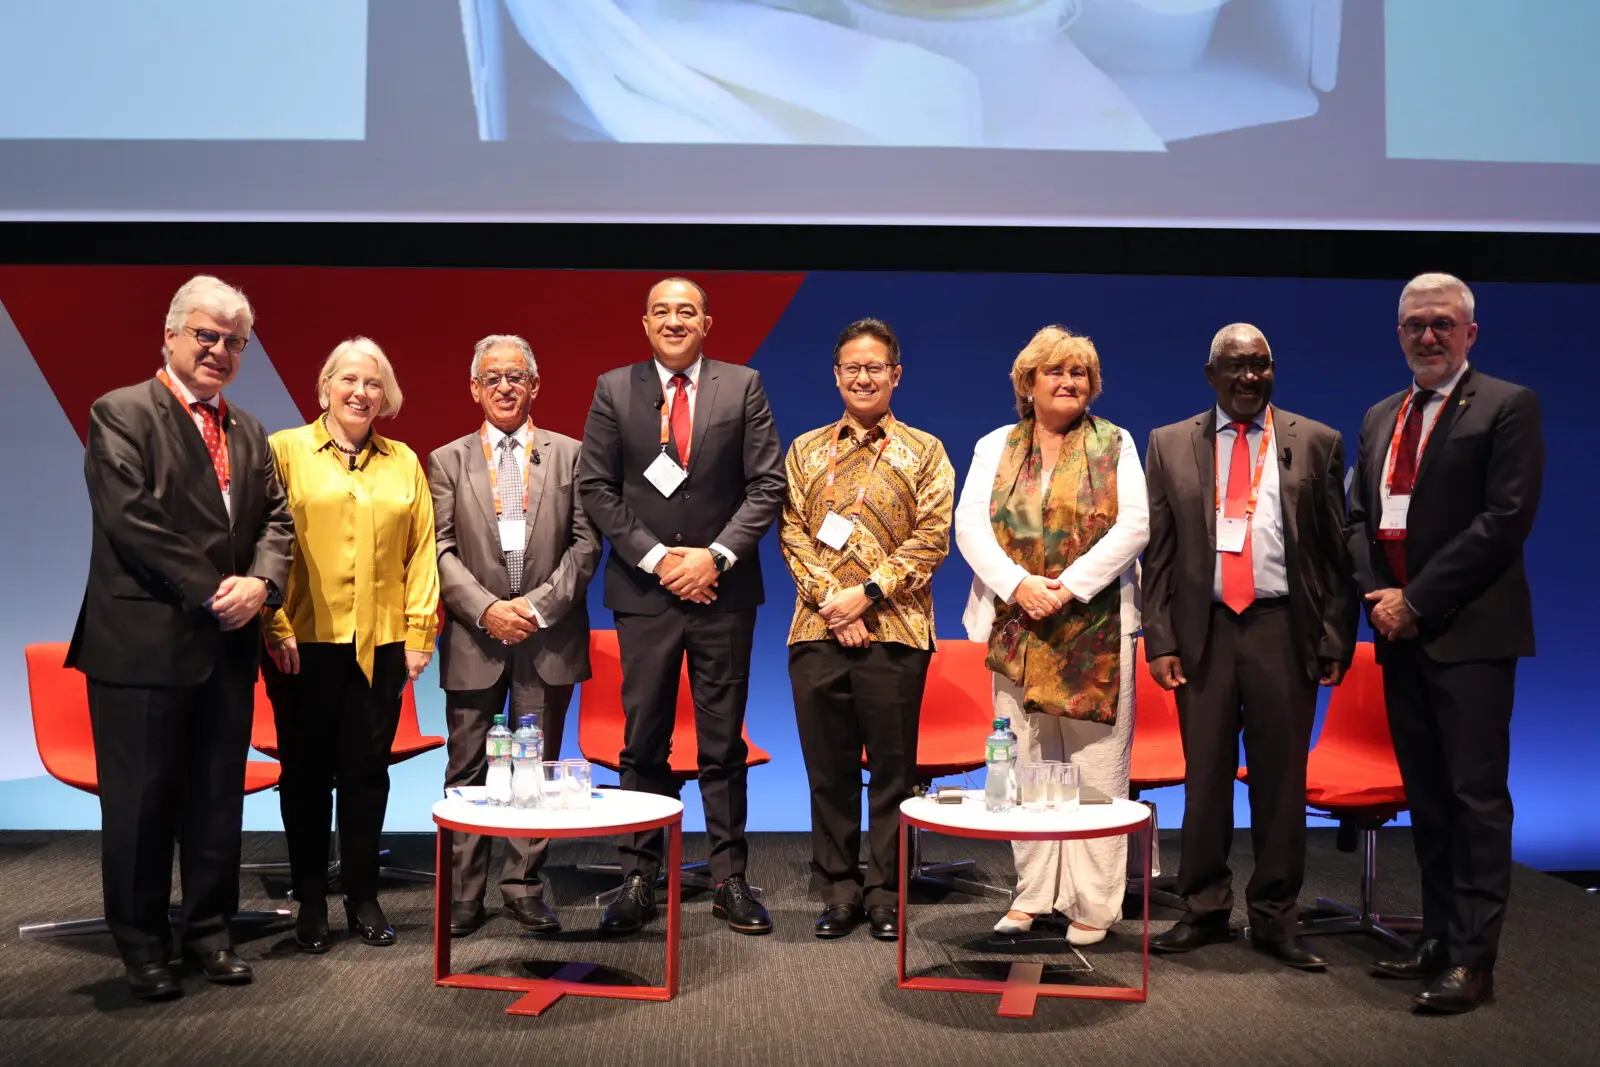 heart disease professionals gathered at the World Heart Summit